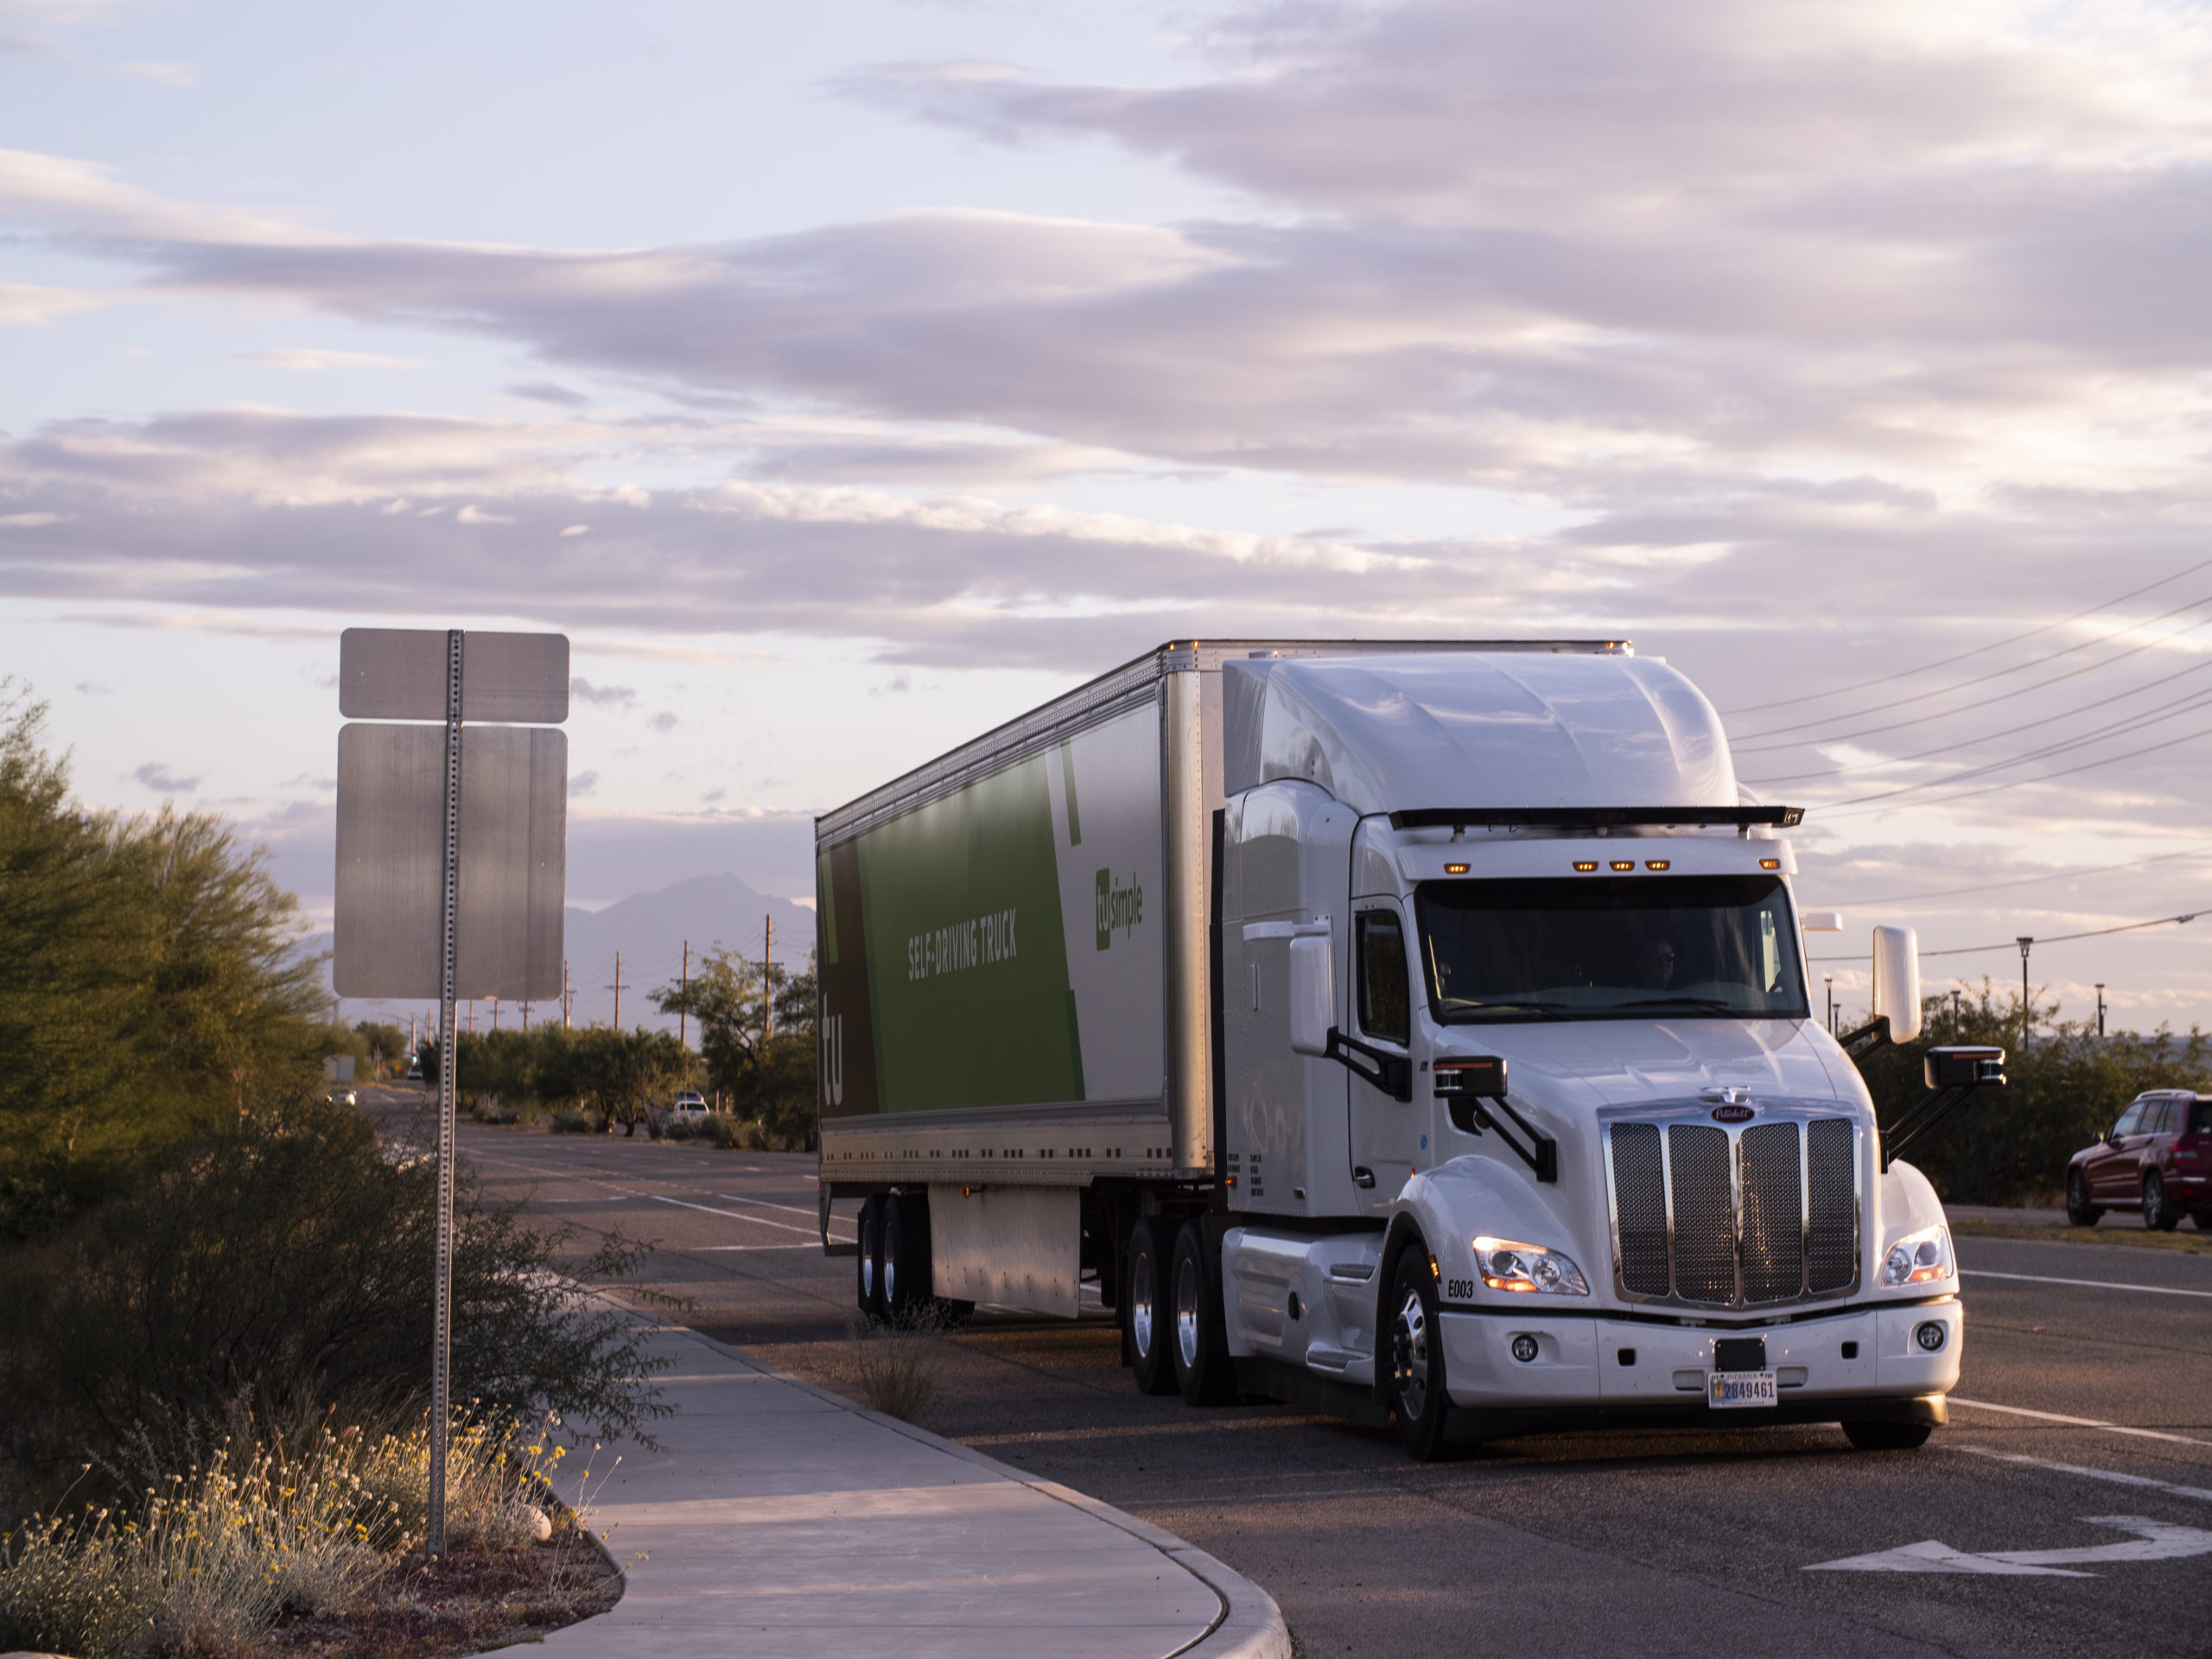 TuSimple appears ready for a nationwide autonomous freight network with its partner UPS, but challenges remain